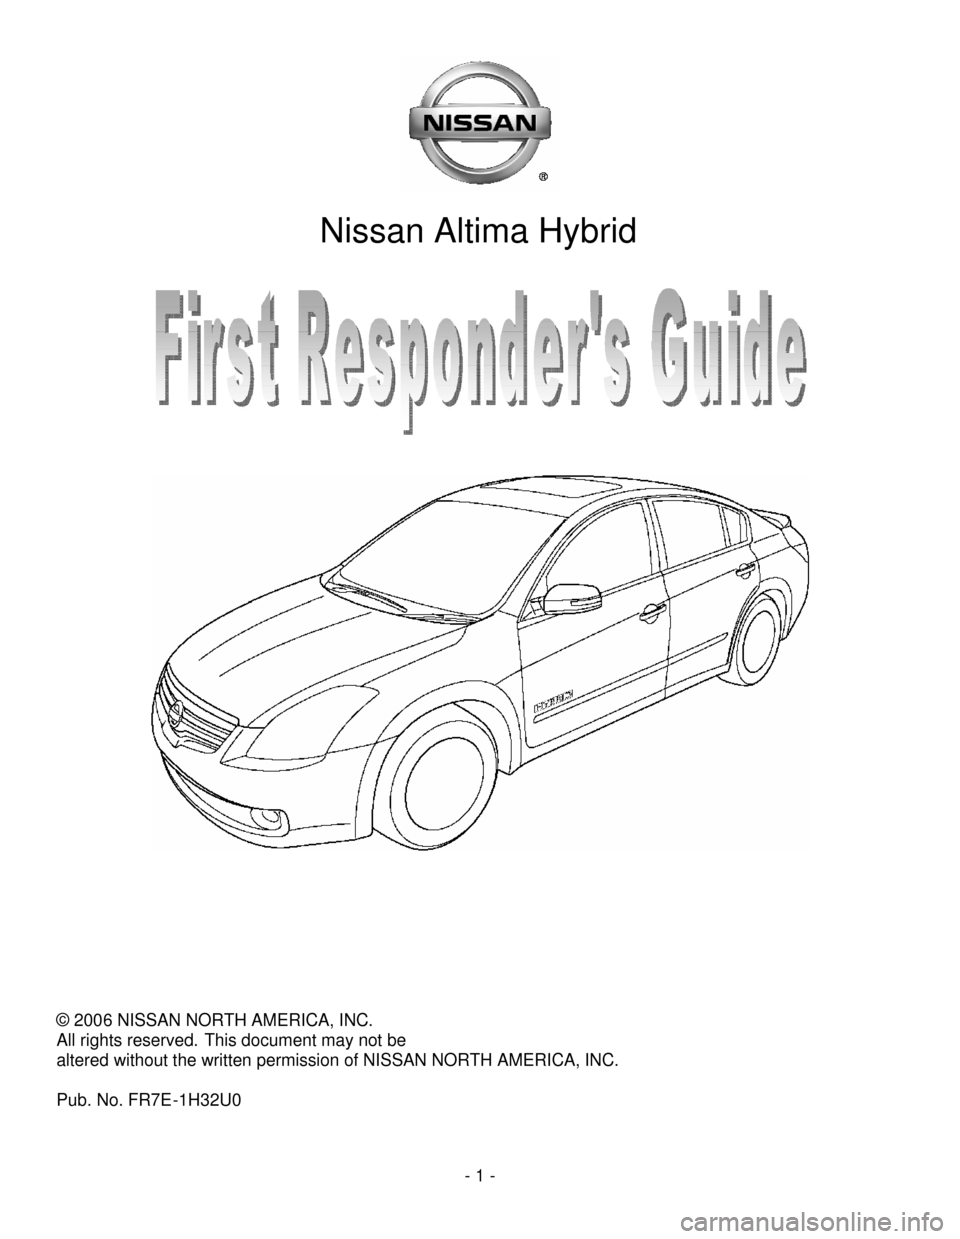 NISSAN ALTIMA HYBRID 2007 L32A / 4.G First Responders Guide - 1-
Nissan Altima Hybrid
© 2006 NISSAN NORTH AMERICA, INC.
All rights reserved.This document may not be
altered without the written permission of NISSAN NORTH AMERICA, INC.
Pub. No. FR7E-1H32U0 